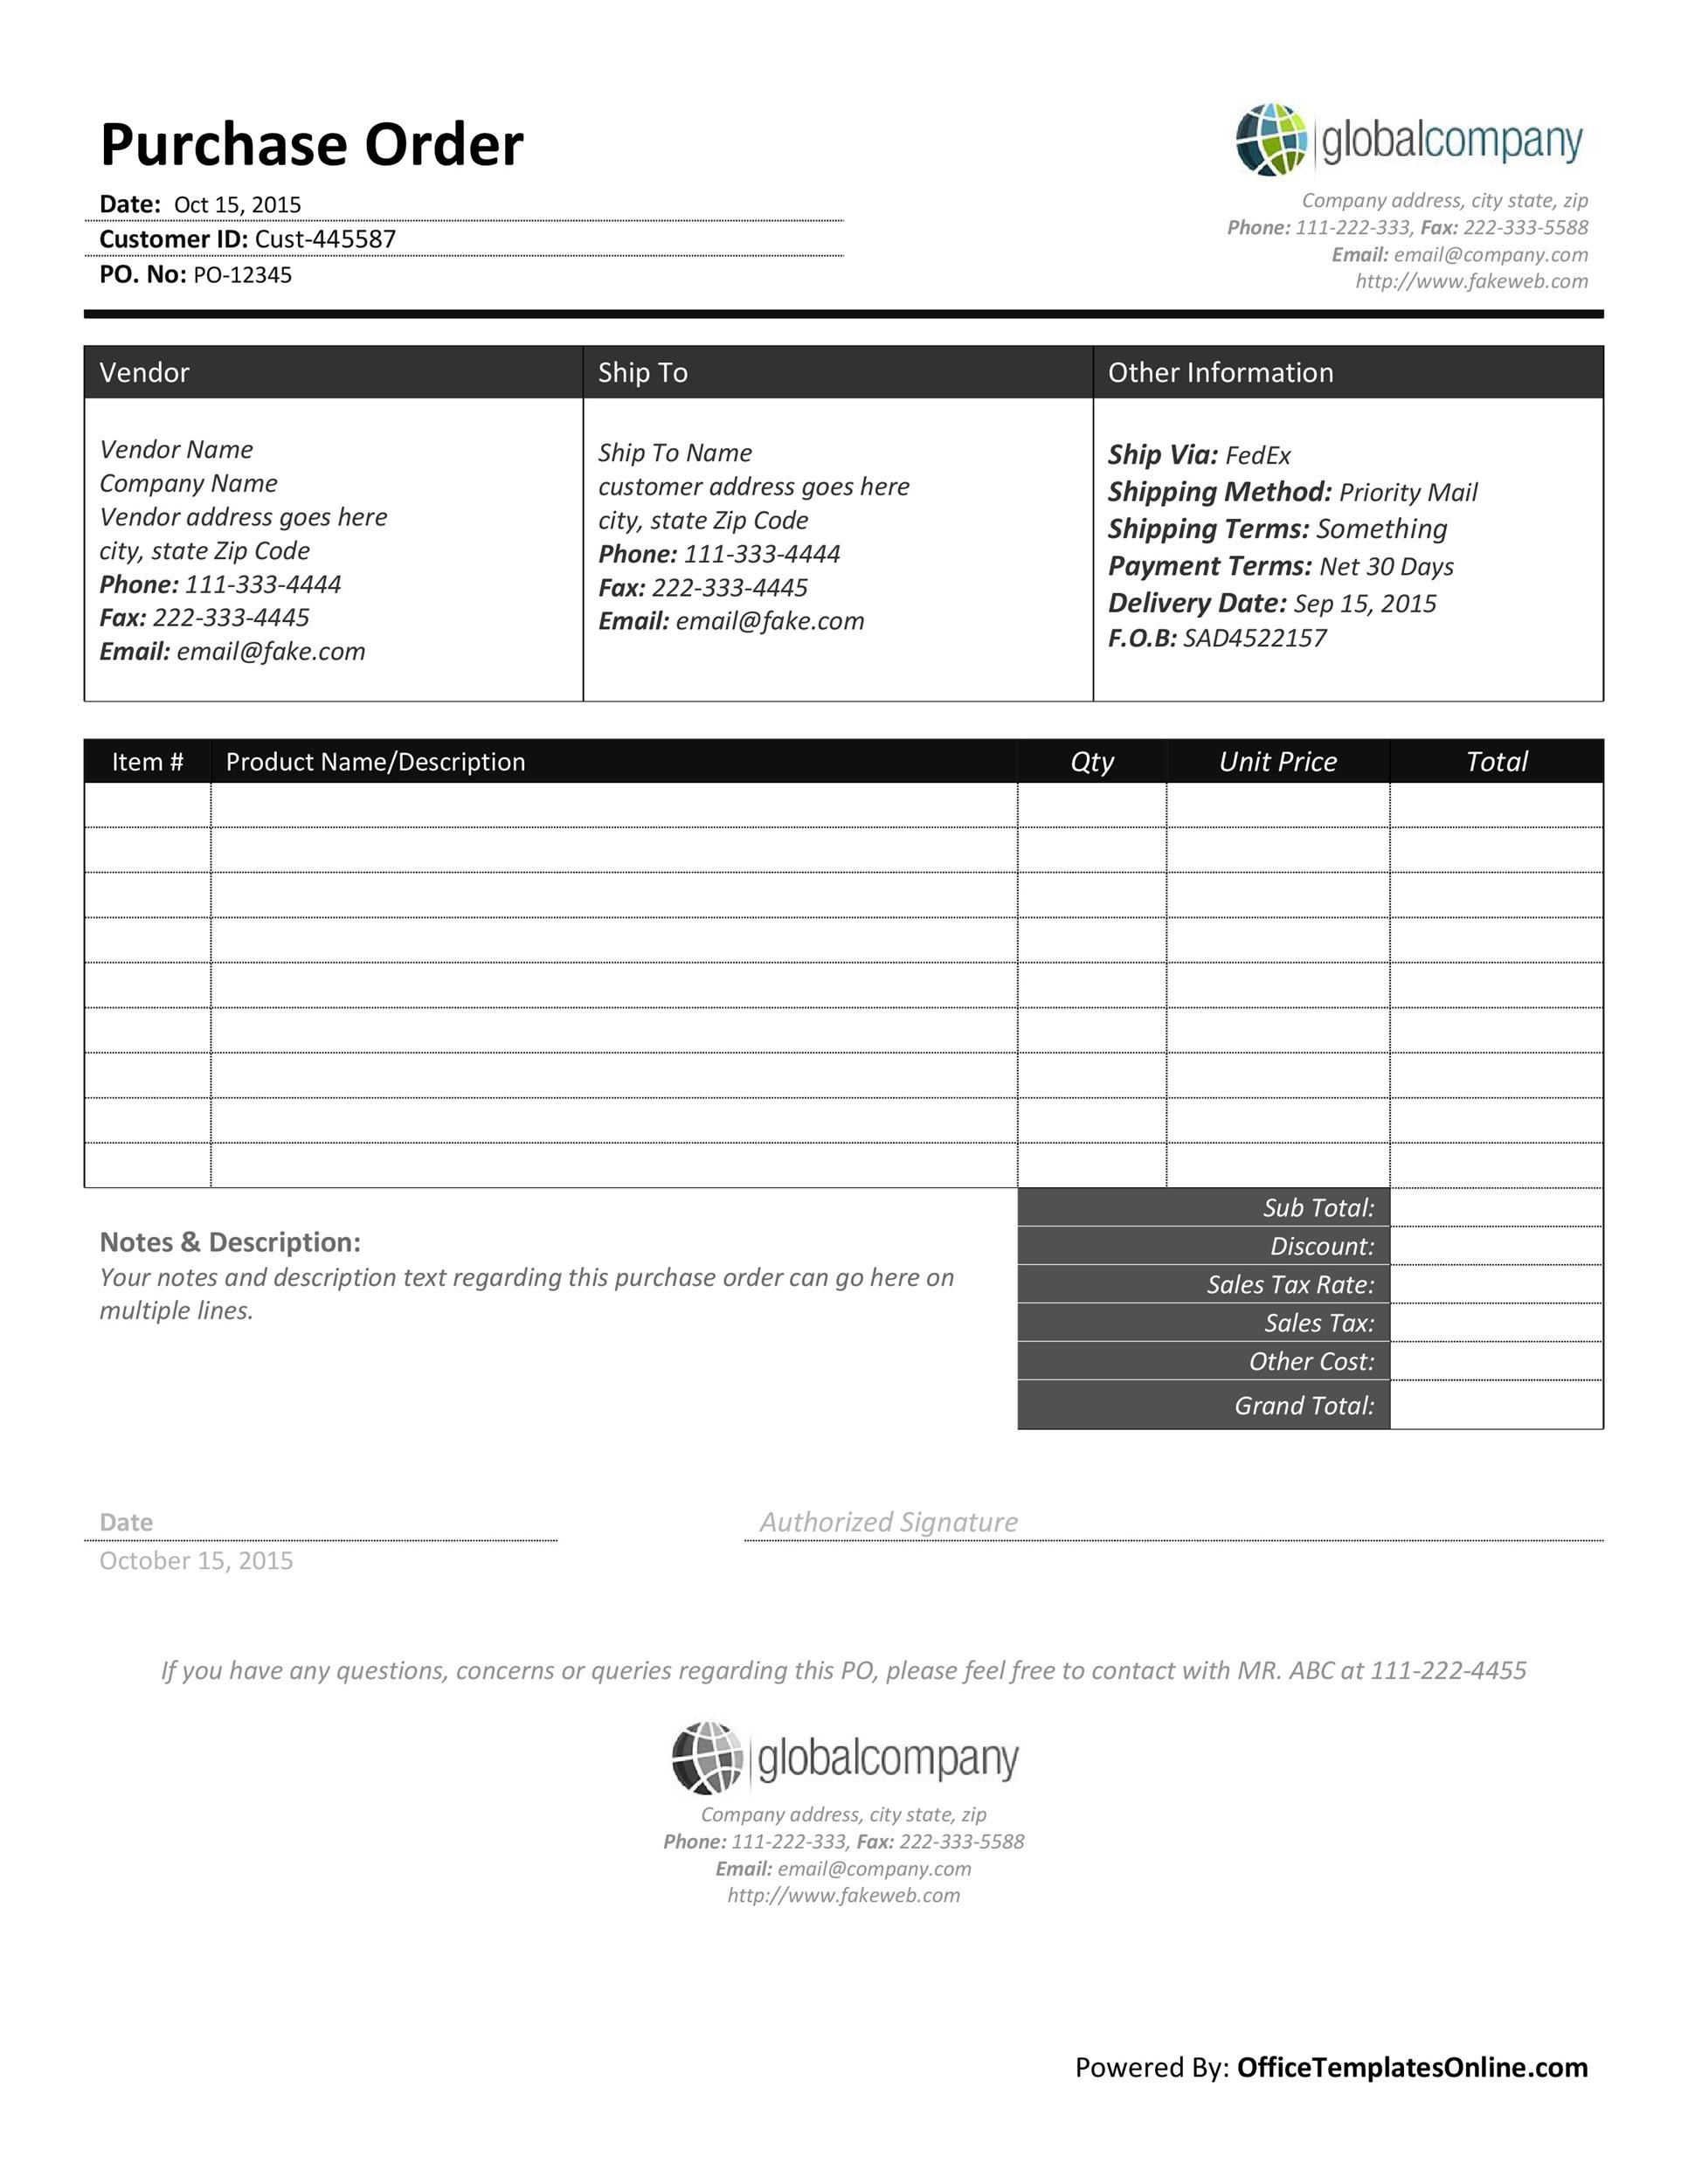 43 Free Purchase Order Templates In Word Excel Pdf Access purchase order template free